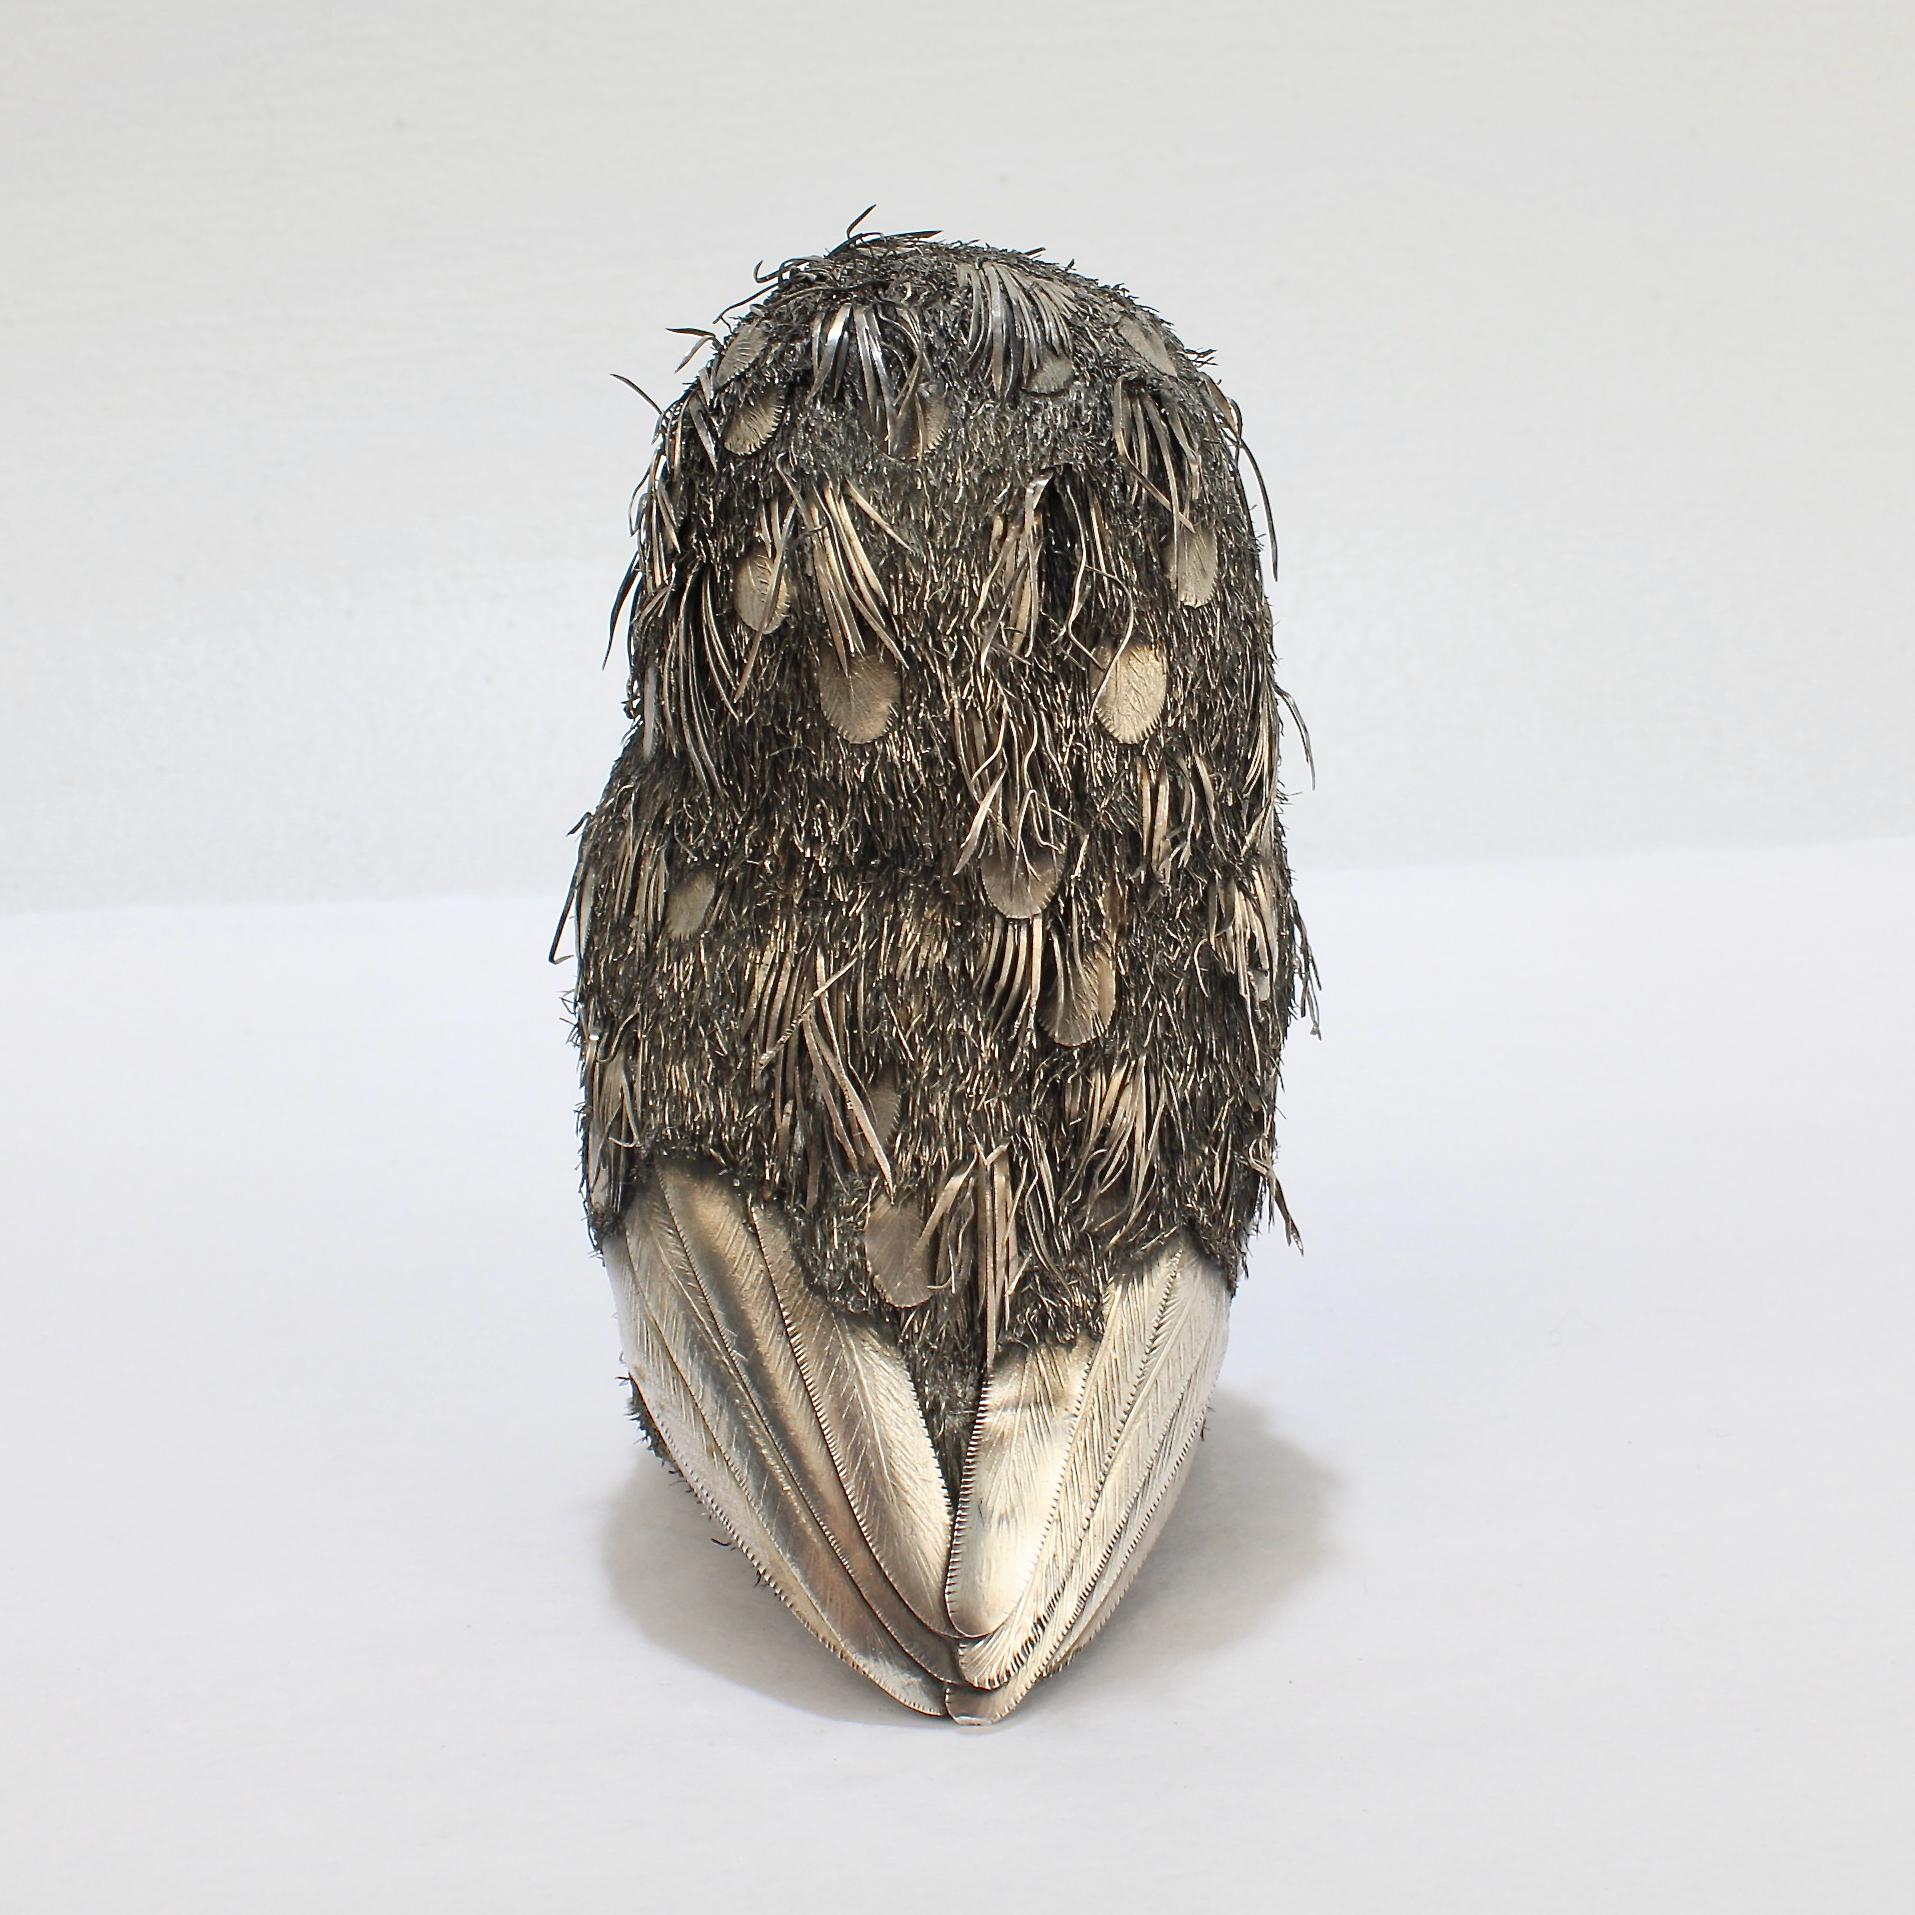 Gianmaria Buccellati 800 Silver Sculpture of a Fledgling or Baby Owl 2